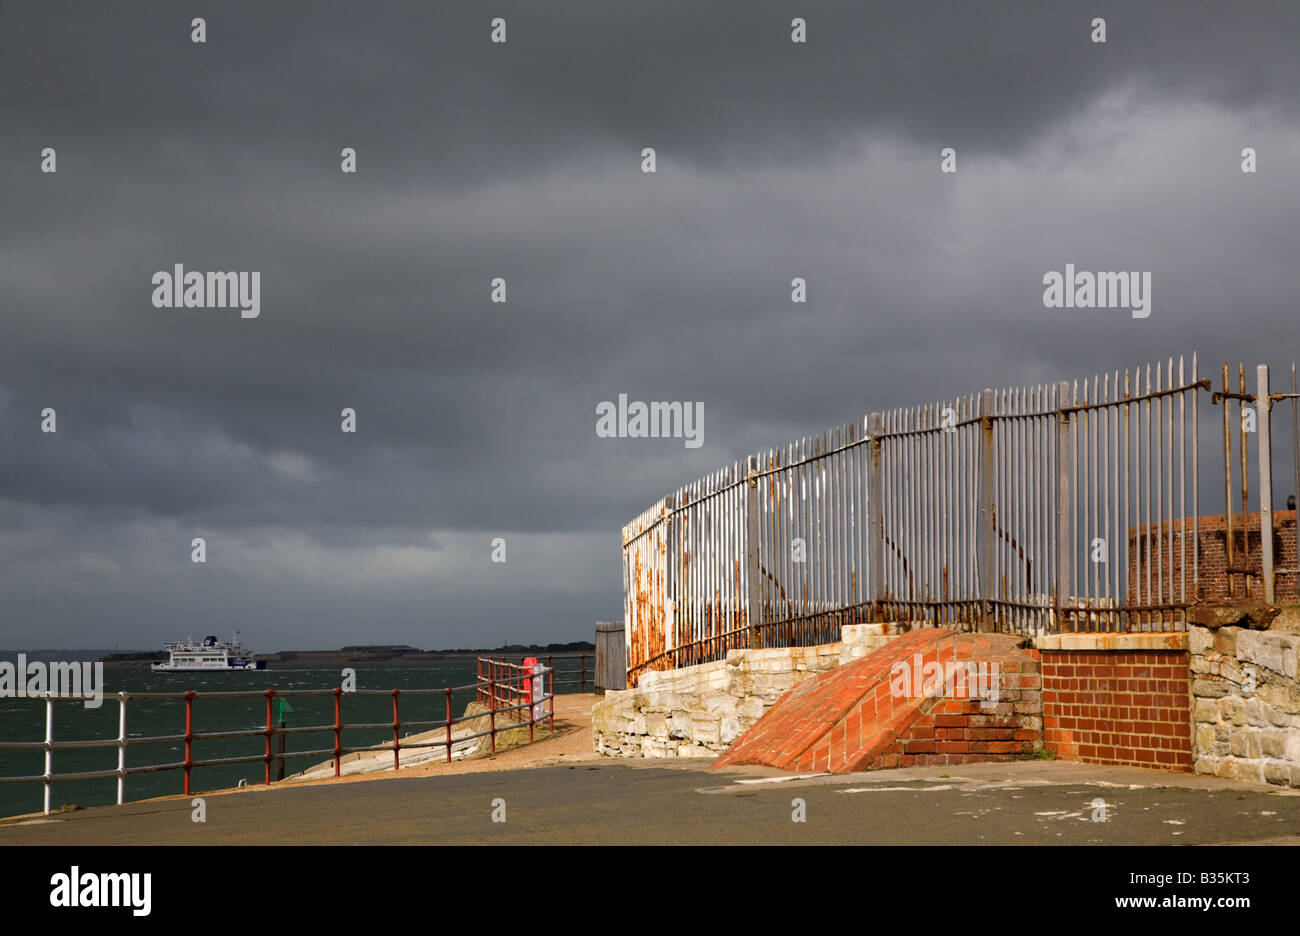 rusty and corroded railings and broken brickwork on the Portsmouth coast against a dark stormy sky Stock Photo